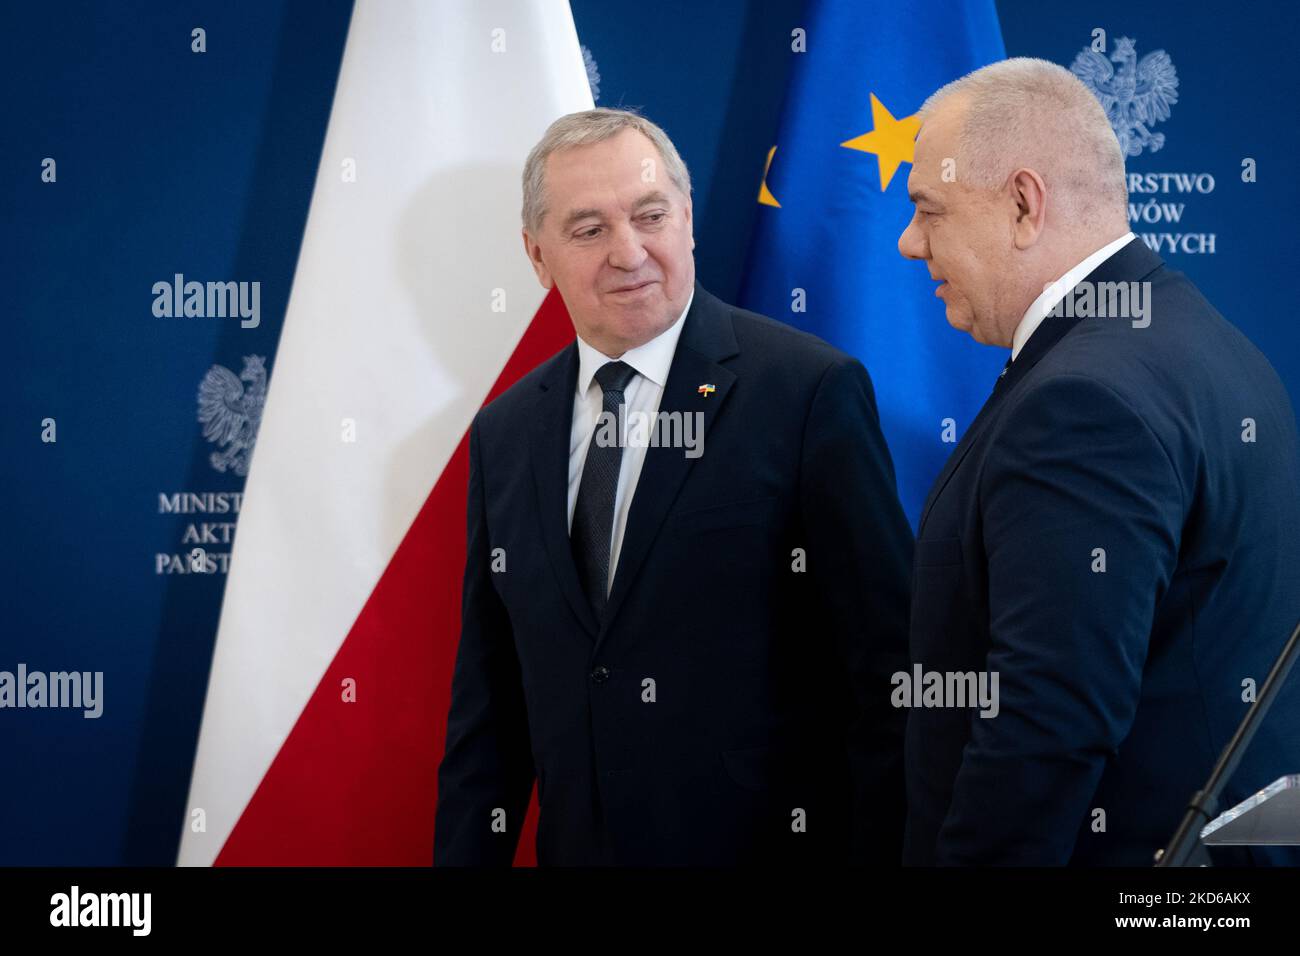 Polish Minister of Agriculture Henryk Kowalczyk and Minister for State Assets Jacek Sasin during a joint press conference on state-owned Food Holding Company in Warsaw, Poland on March 29, 2022 (Photo by Mateusz Wlodarczyk/NurPhoto) Stock Photo